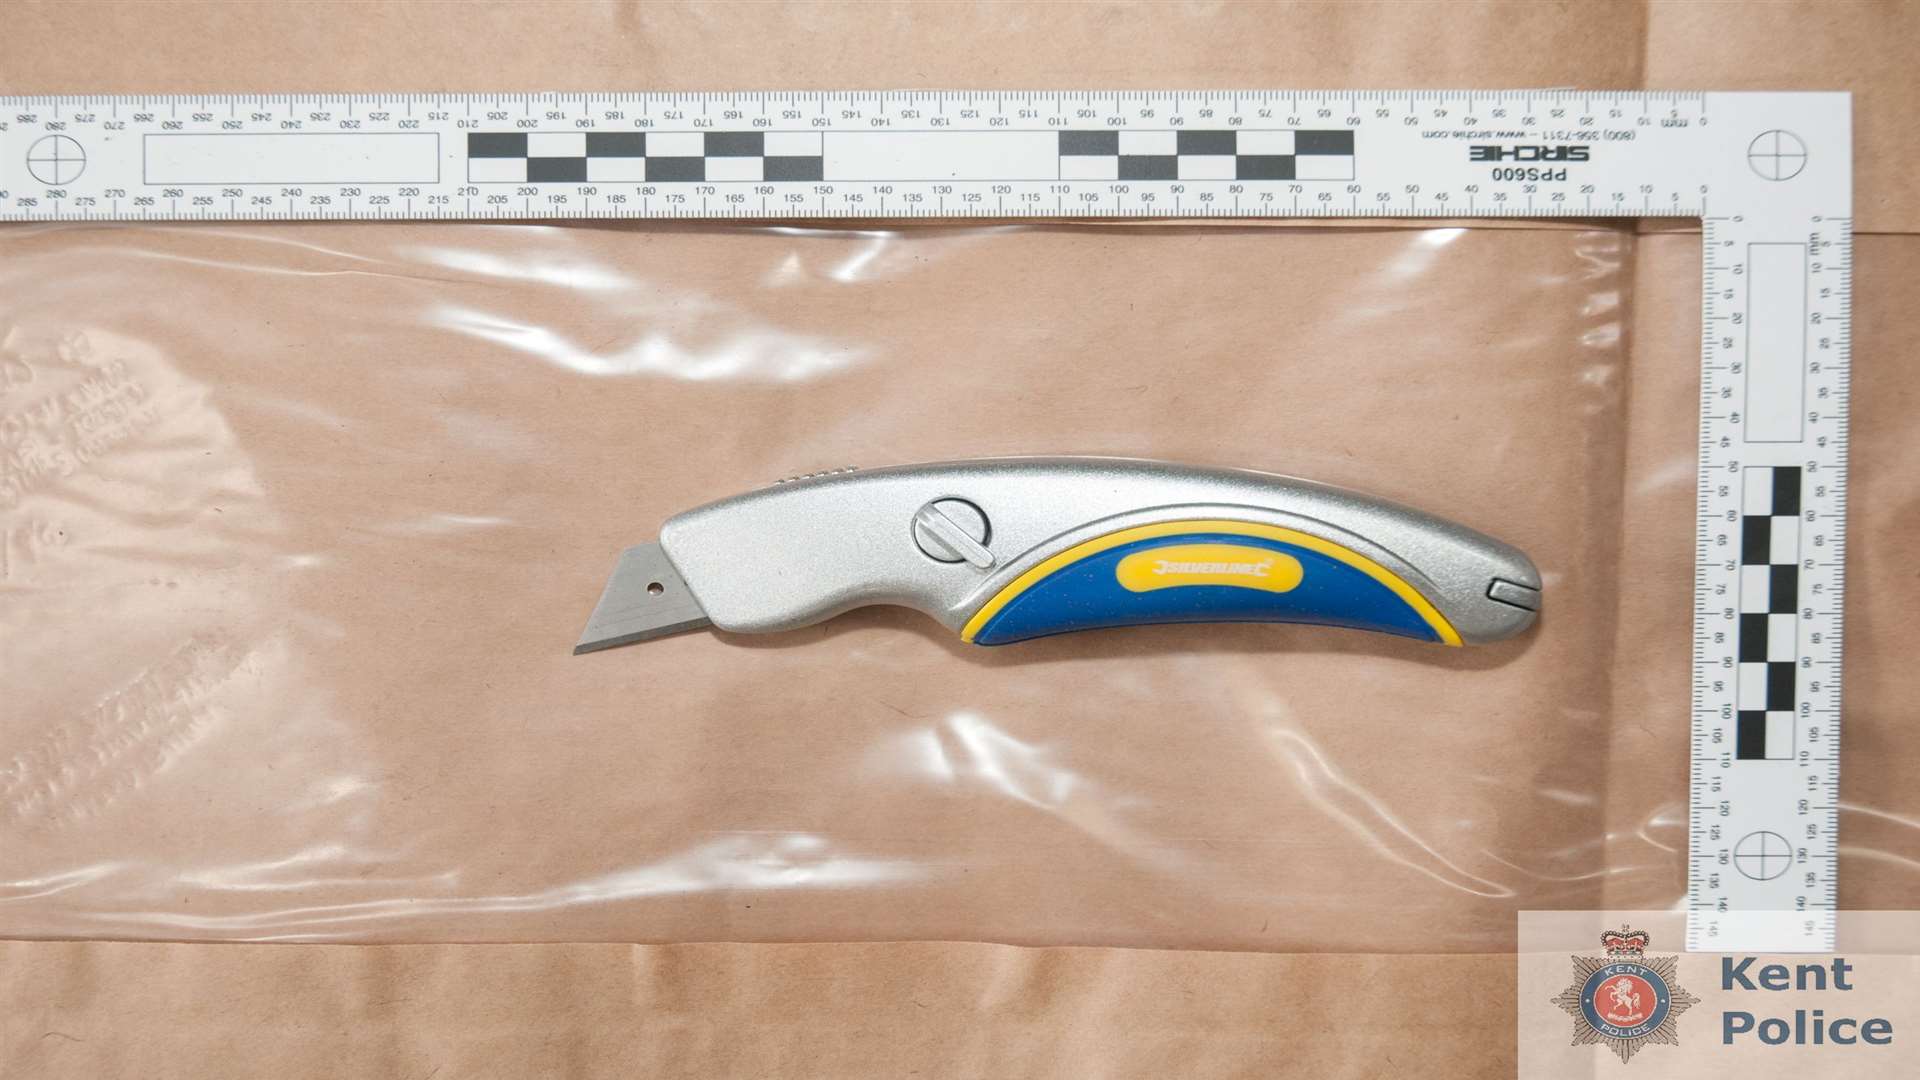 A Stanley knife found in Stimpson's car